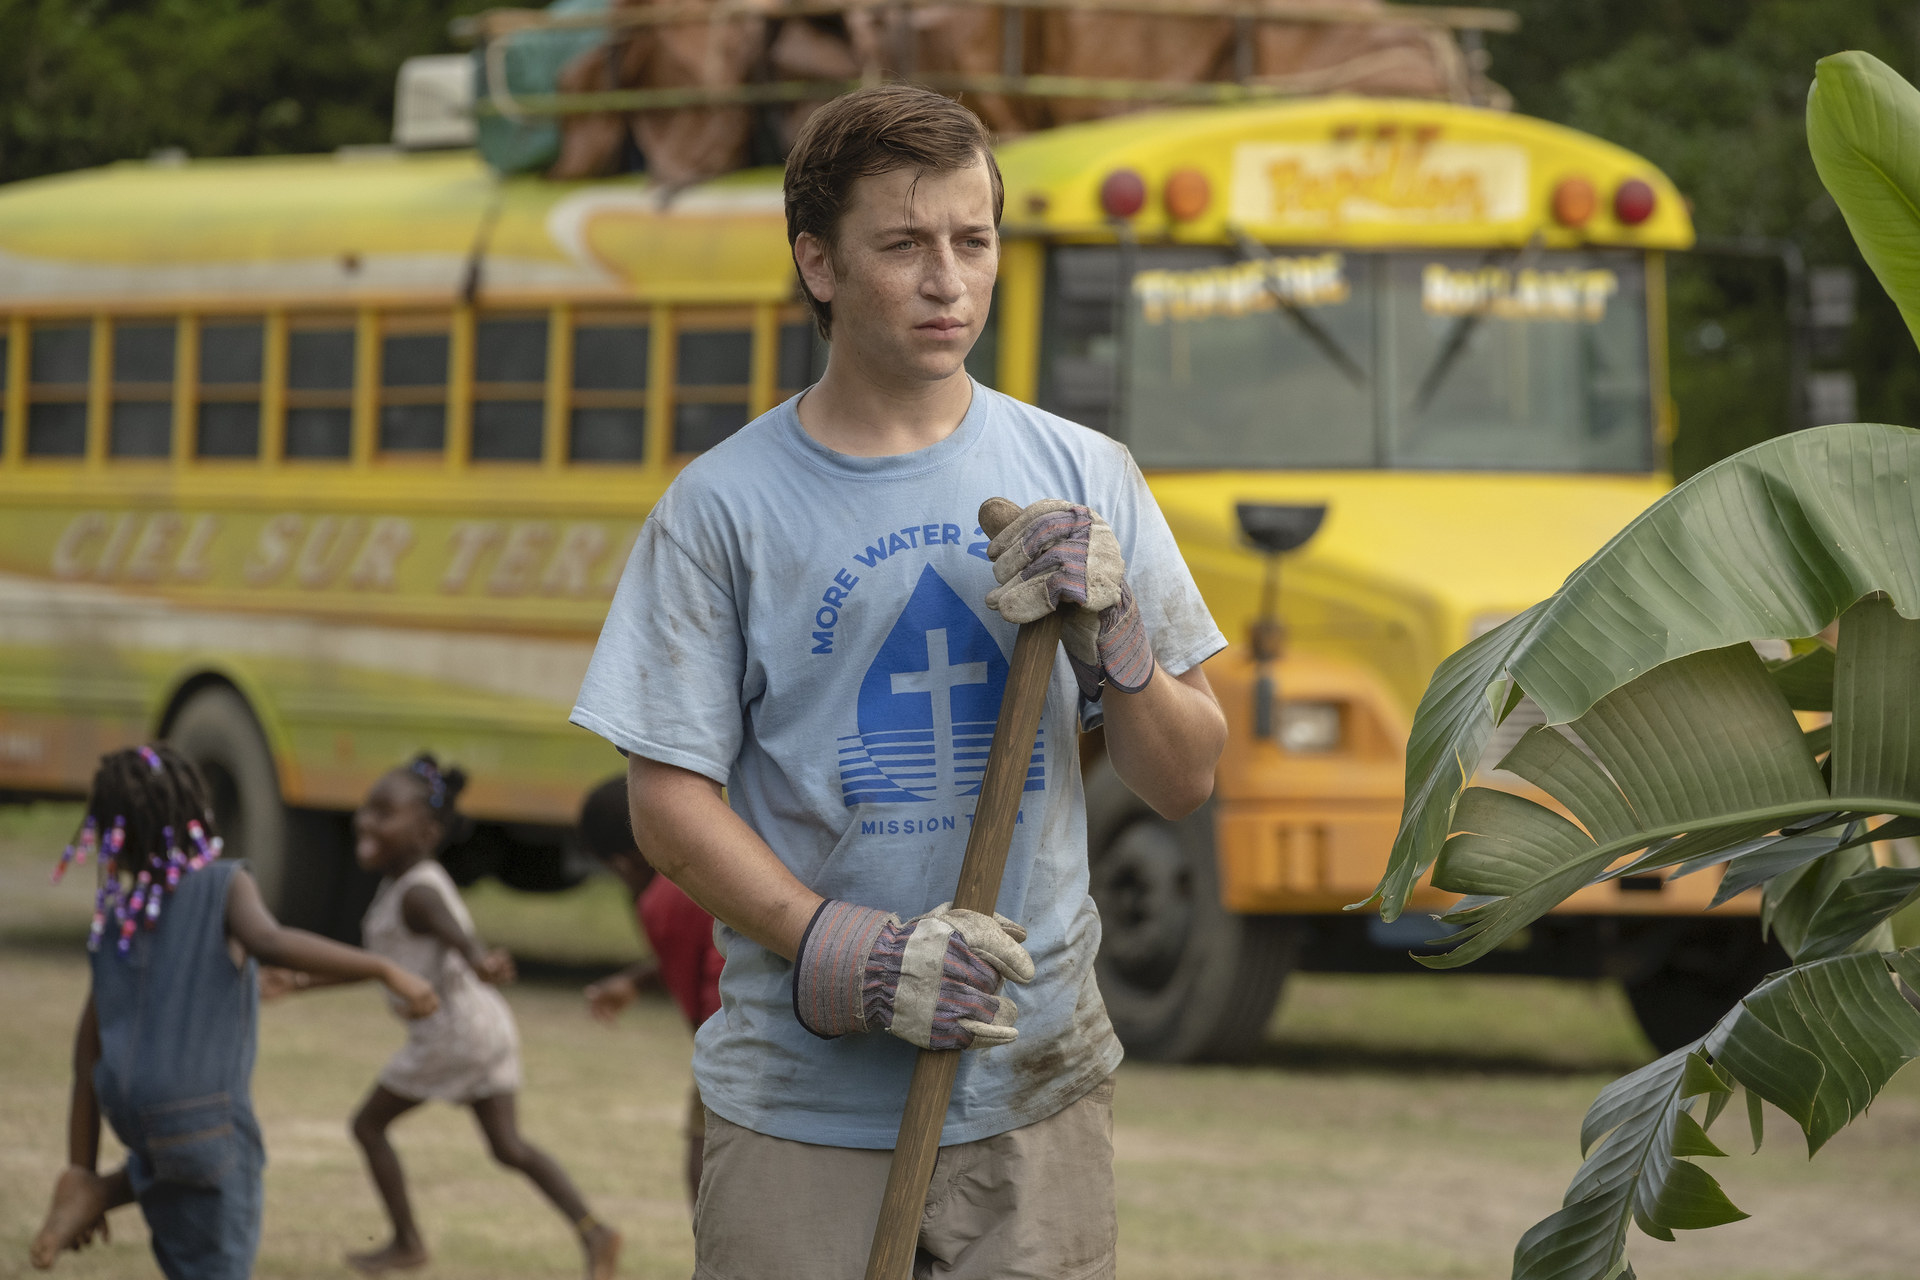 A white teen boy stands with work gloves in front of a bus.